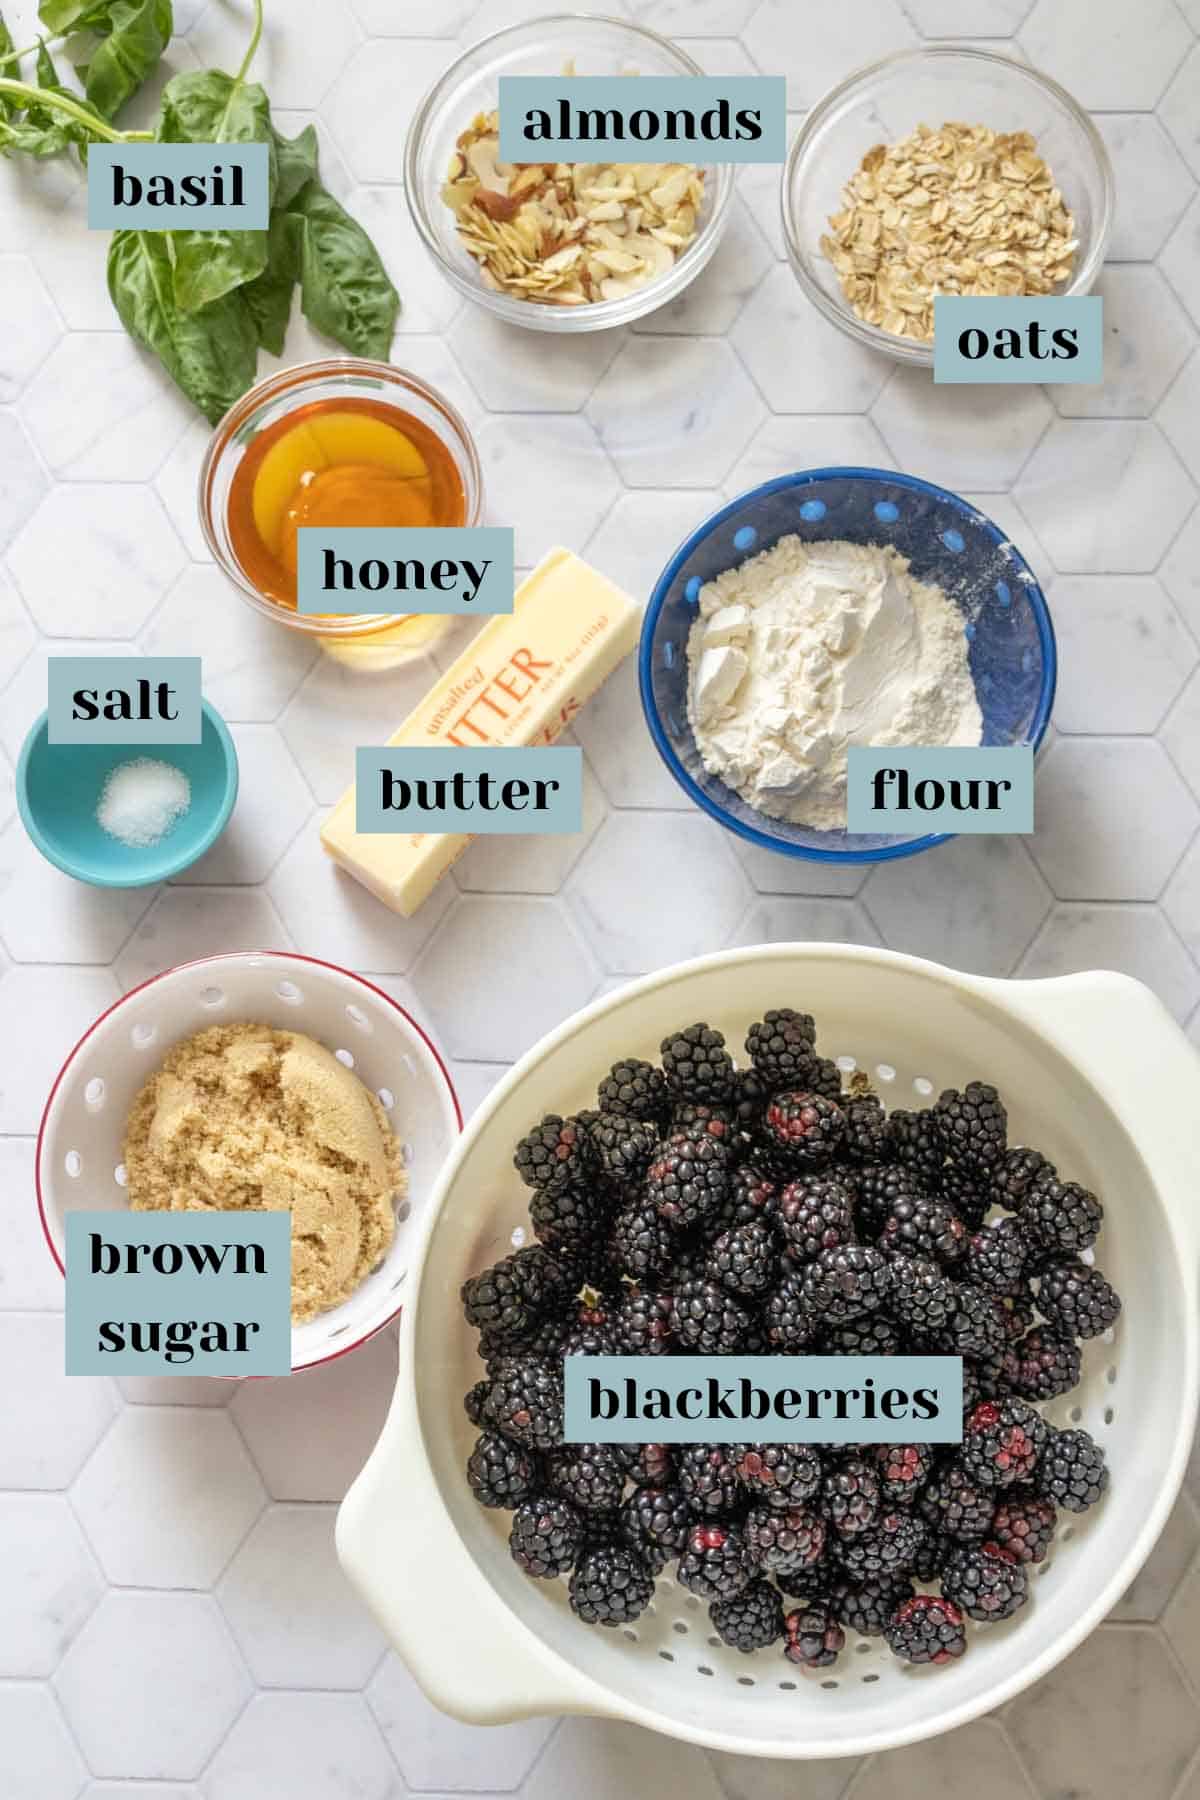 Ingredients for blackberry crisp on a tile surface with labels.